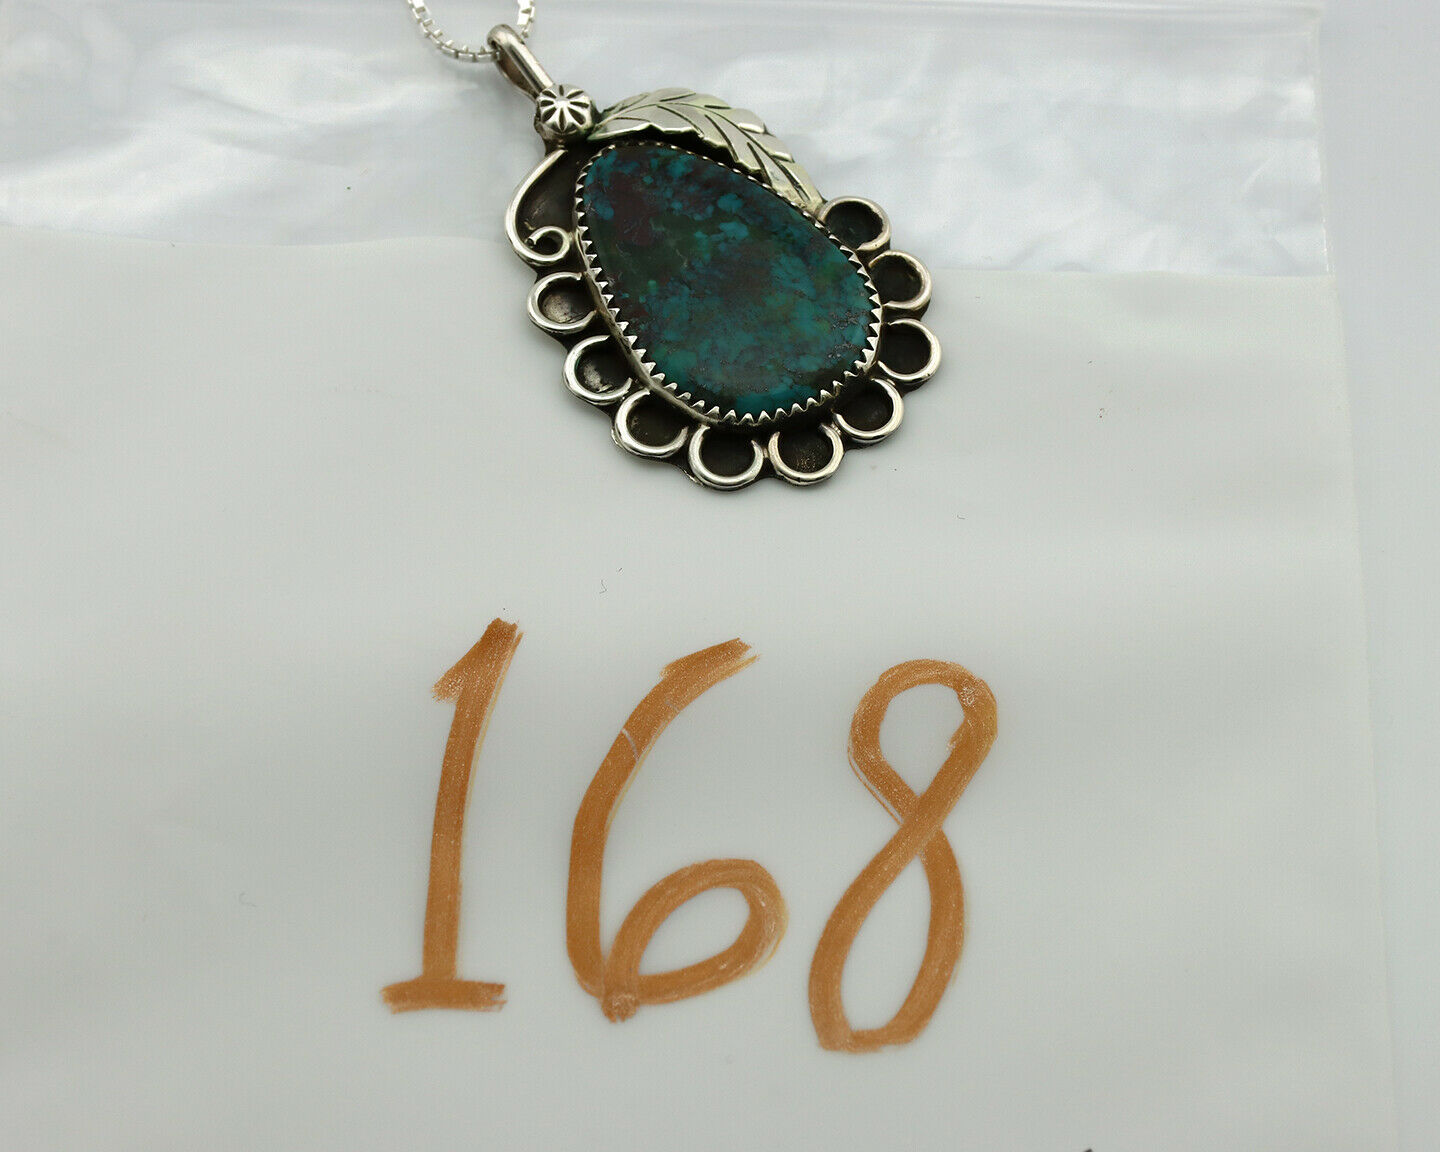 Navajo Necklace .925 Silver Nevada Black Turquoise Signed JR C.1980's